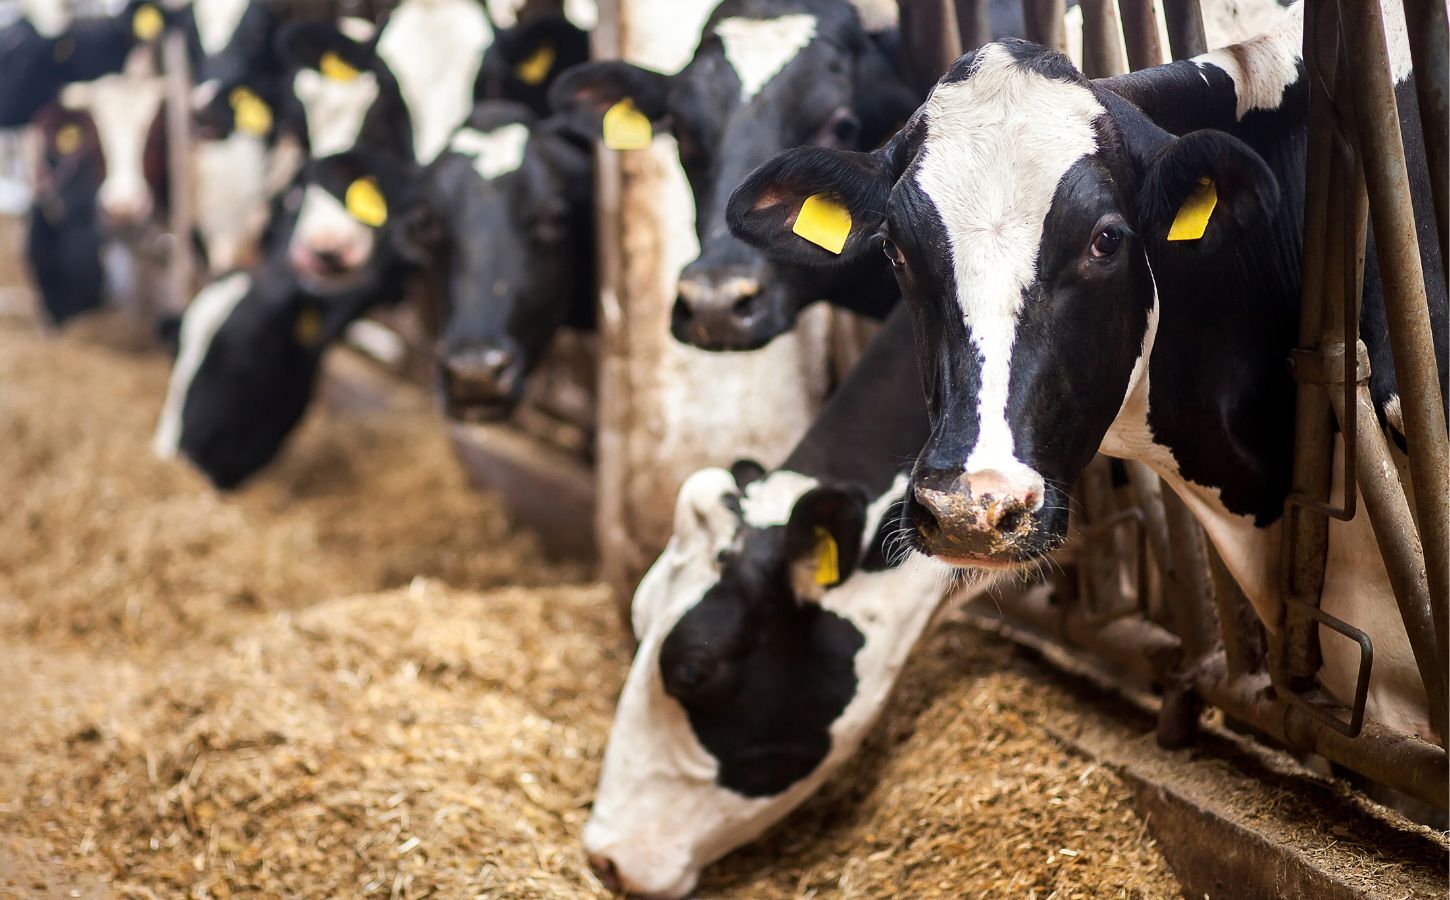 A group of dairy cows in a factory farm